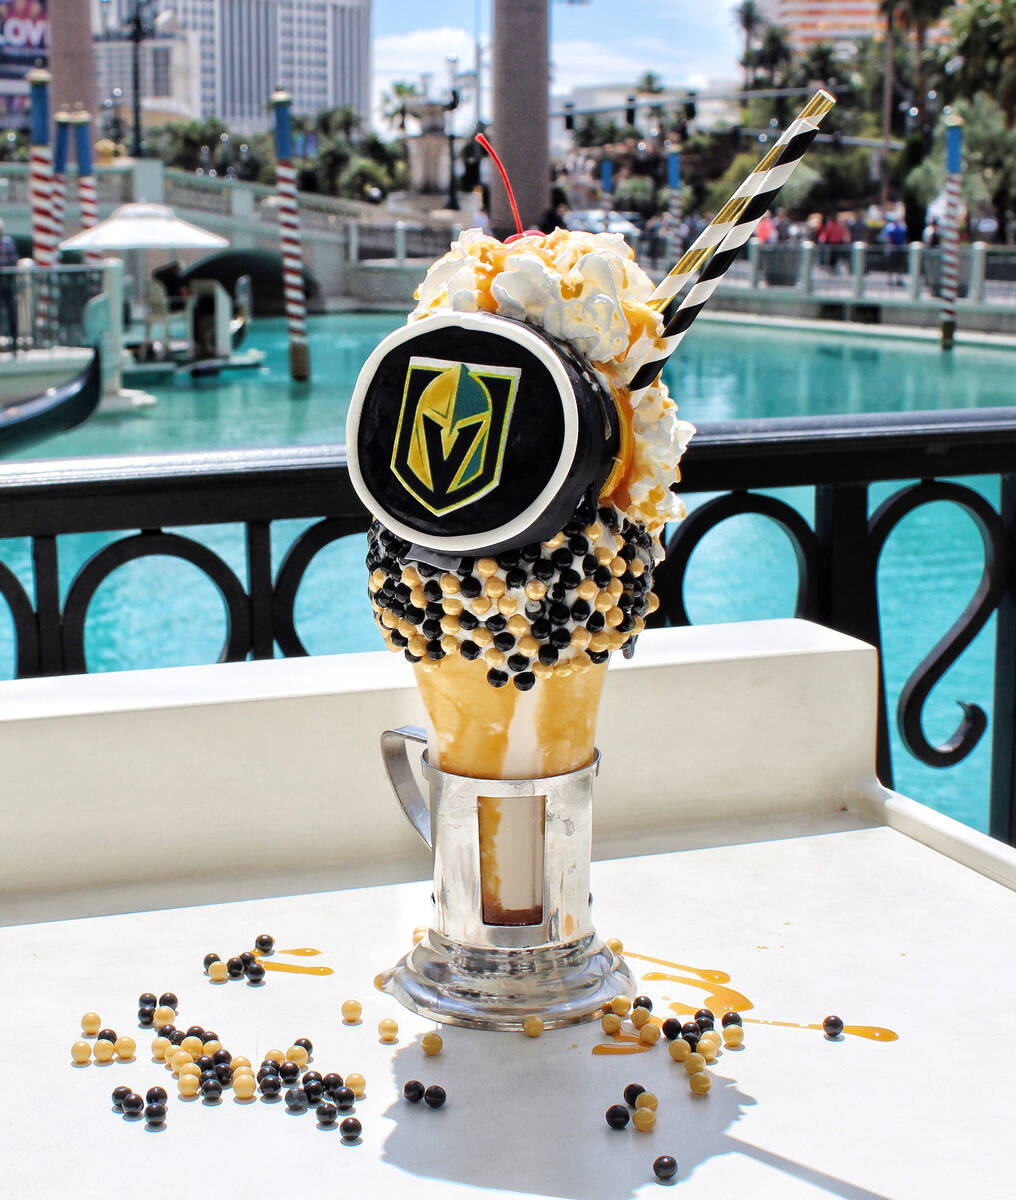 A Golden Knights CrazyShake from Black Tap Craft Burgers & Beer, which has a location in The Ve ...